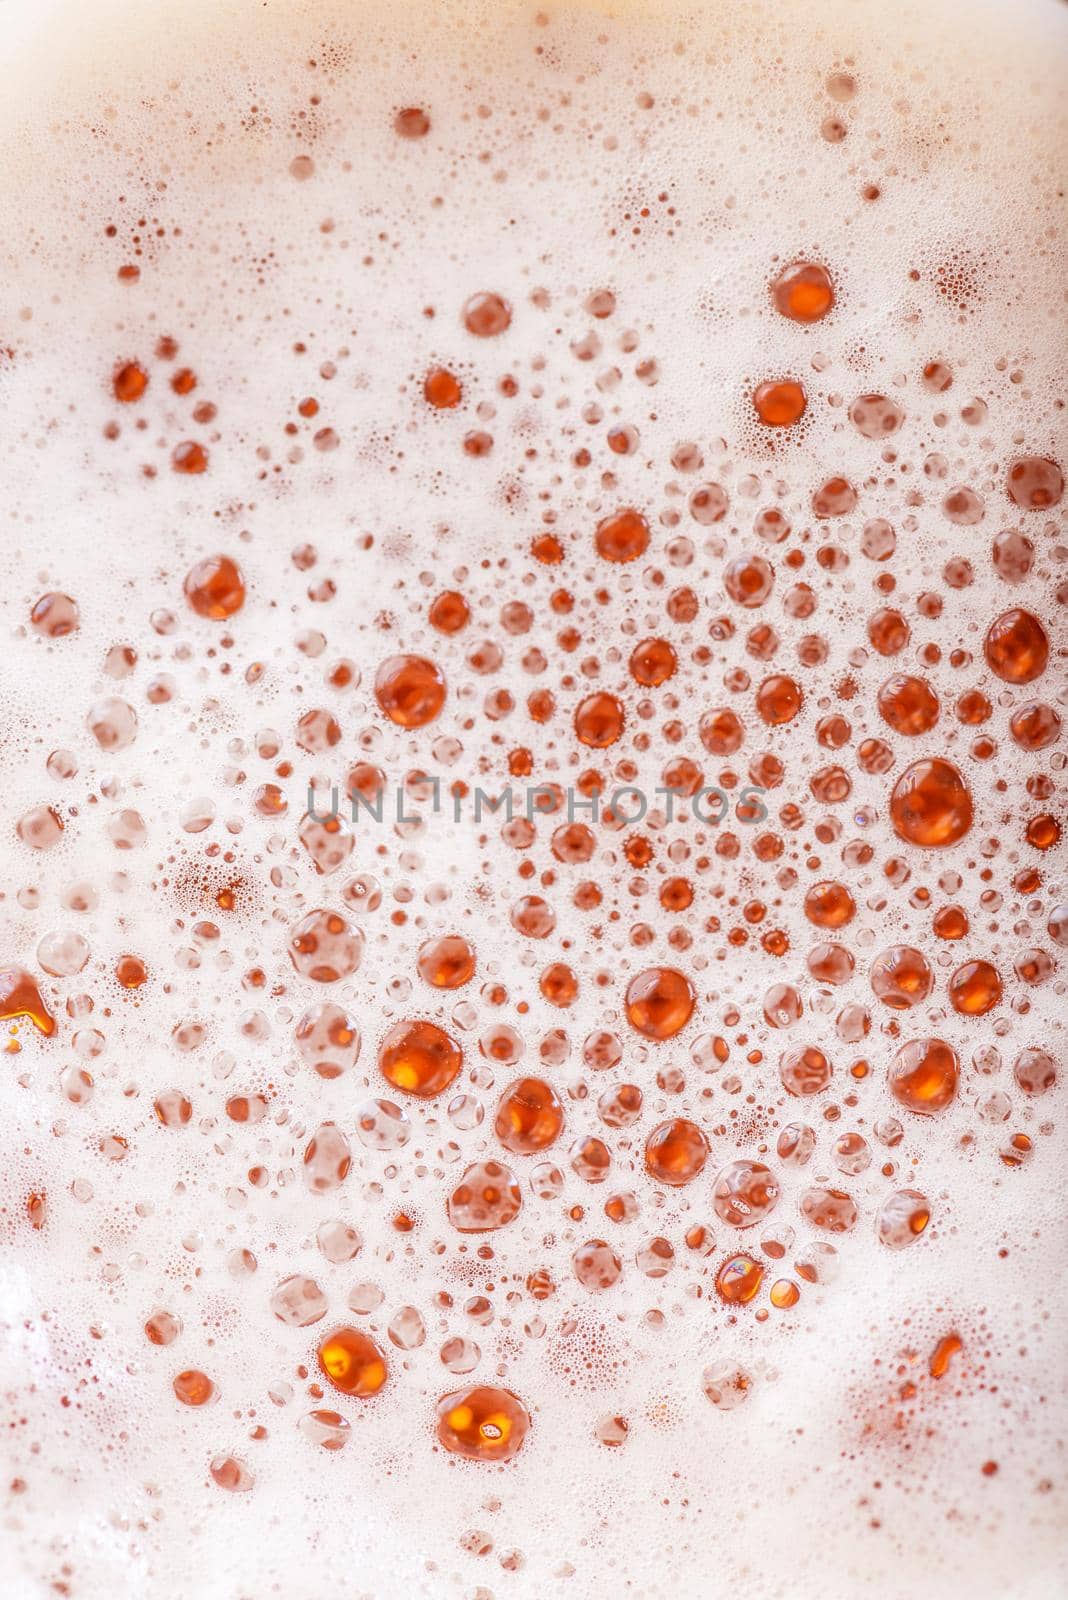 Light Beer with Bubbles and Foam Background. Beer Bubbles Texture Close Up.